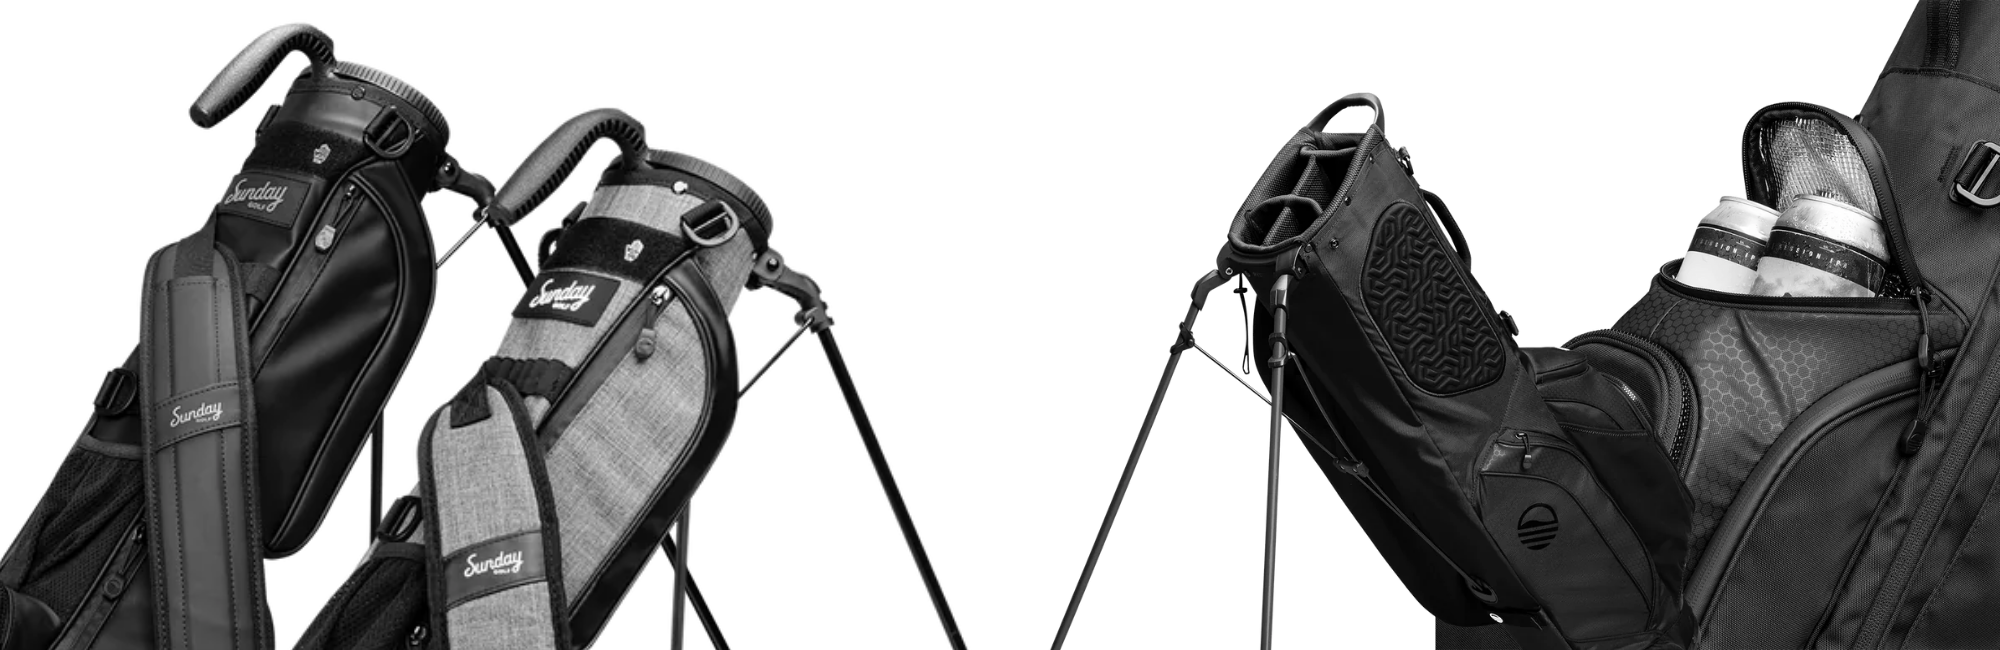 Sunday Golf Golf Bags by Vertical Groove Golf